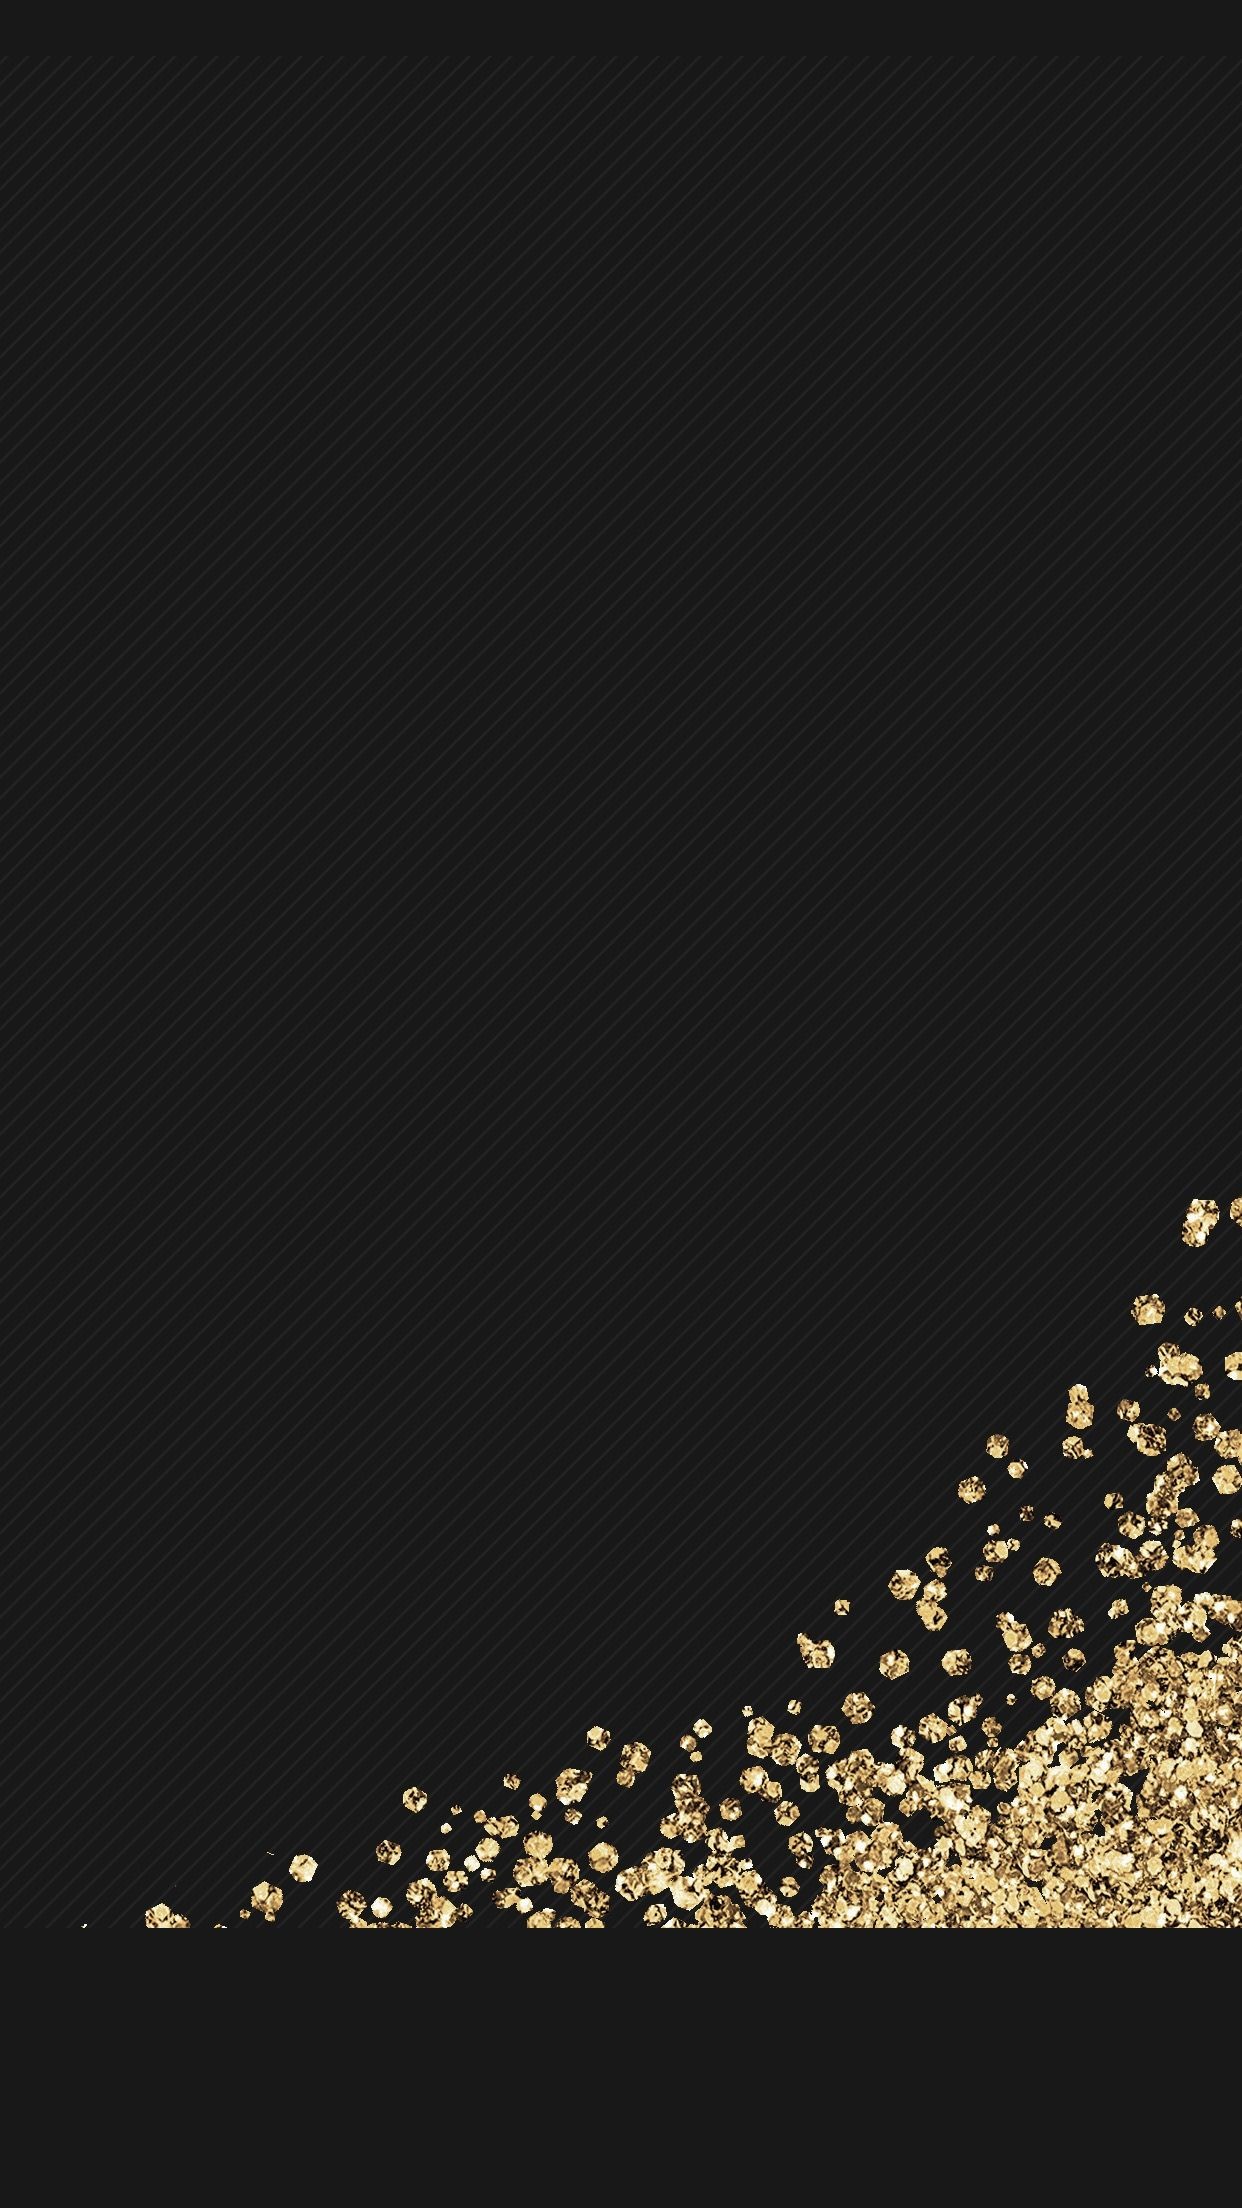 1242x2208 black, gold, glitter, wallpaper, background, iphone, android, HD